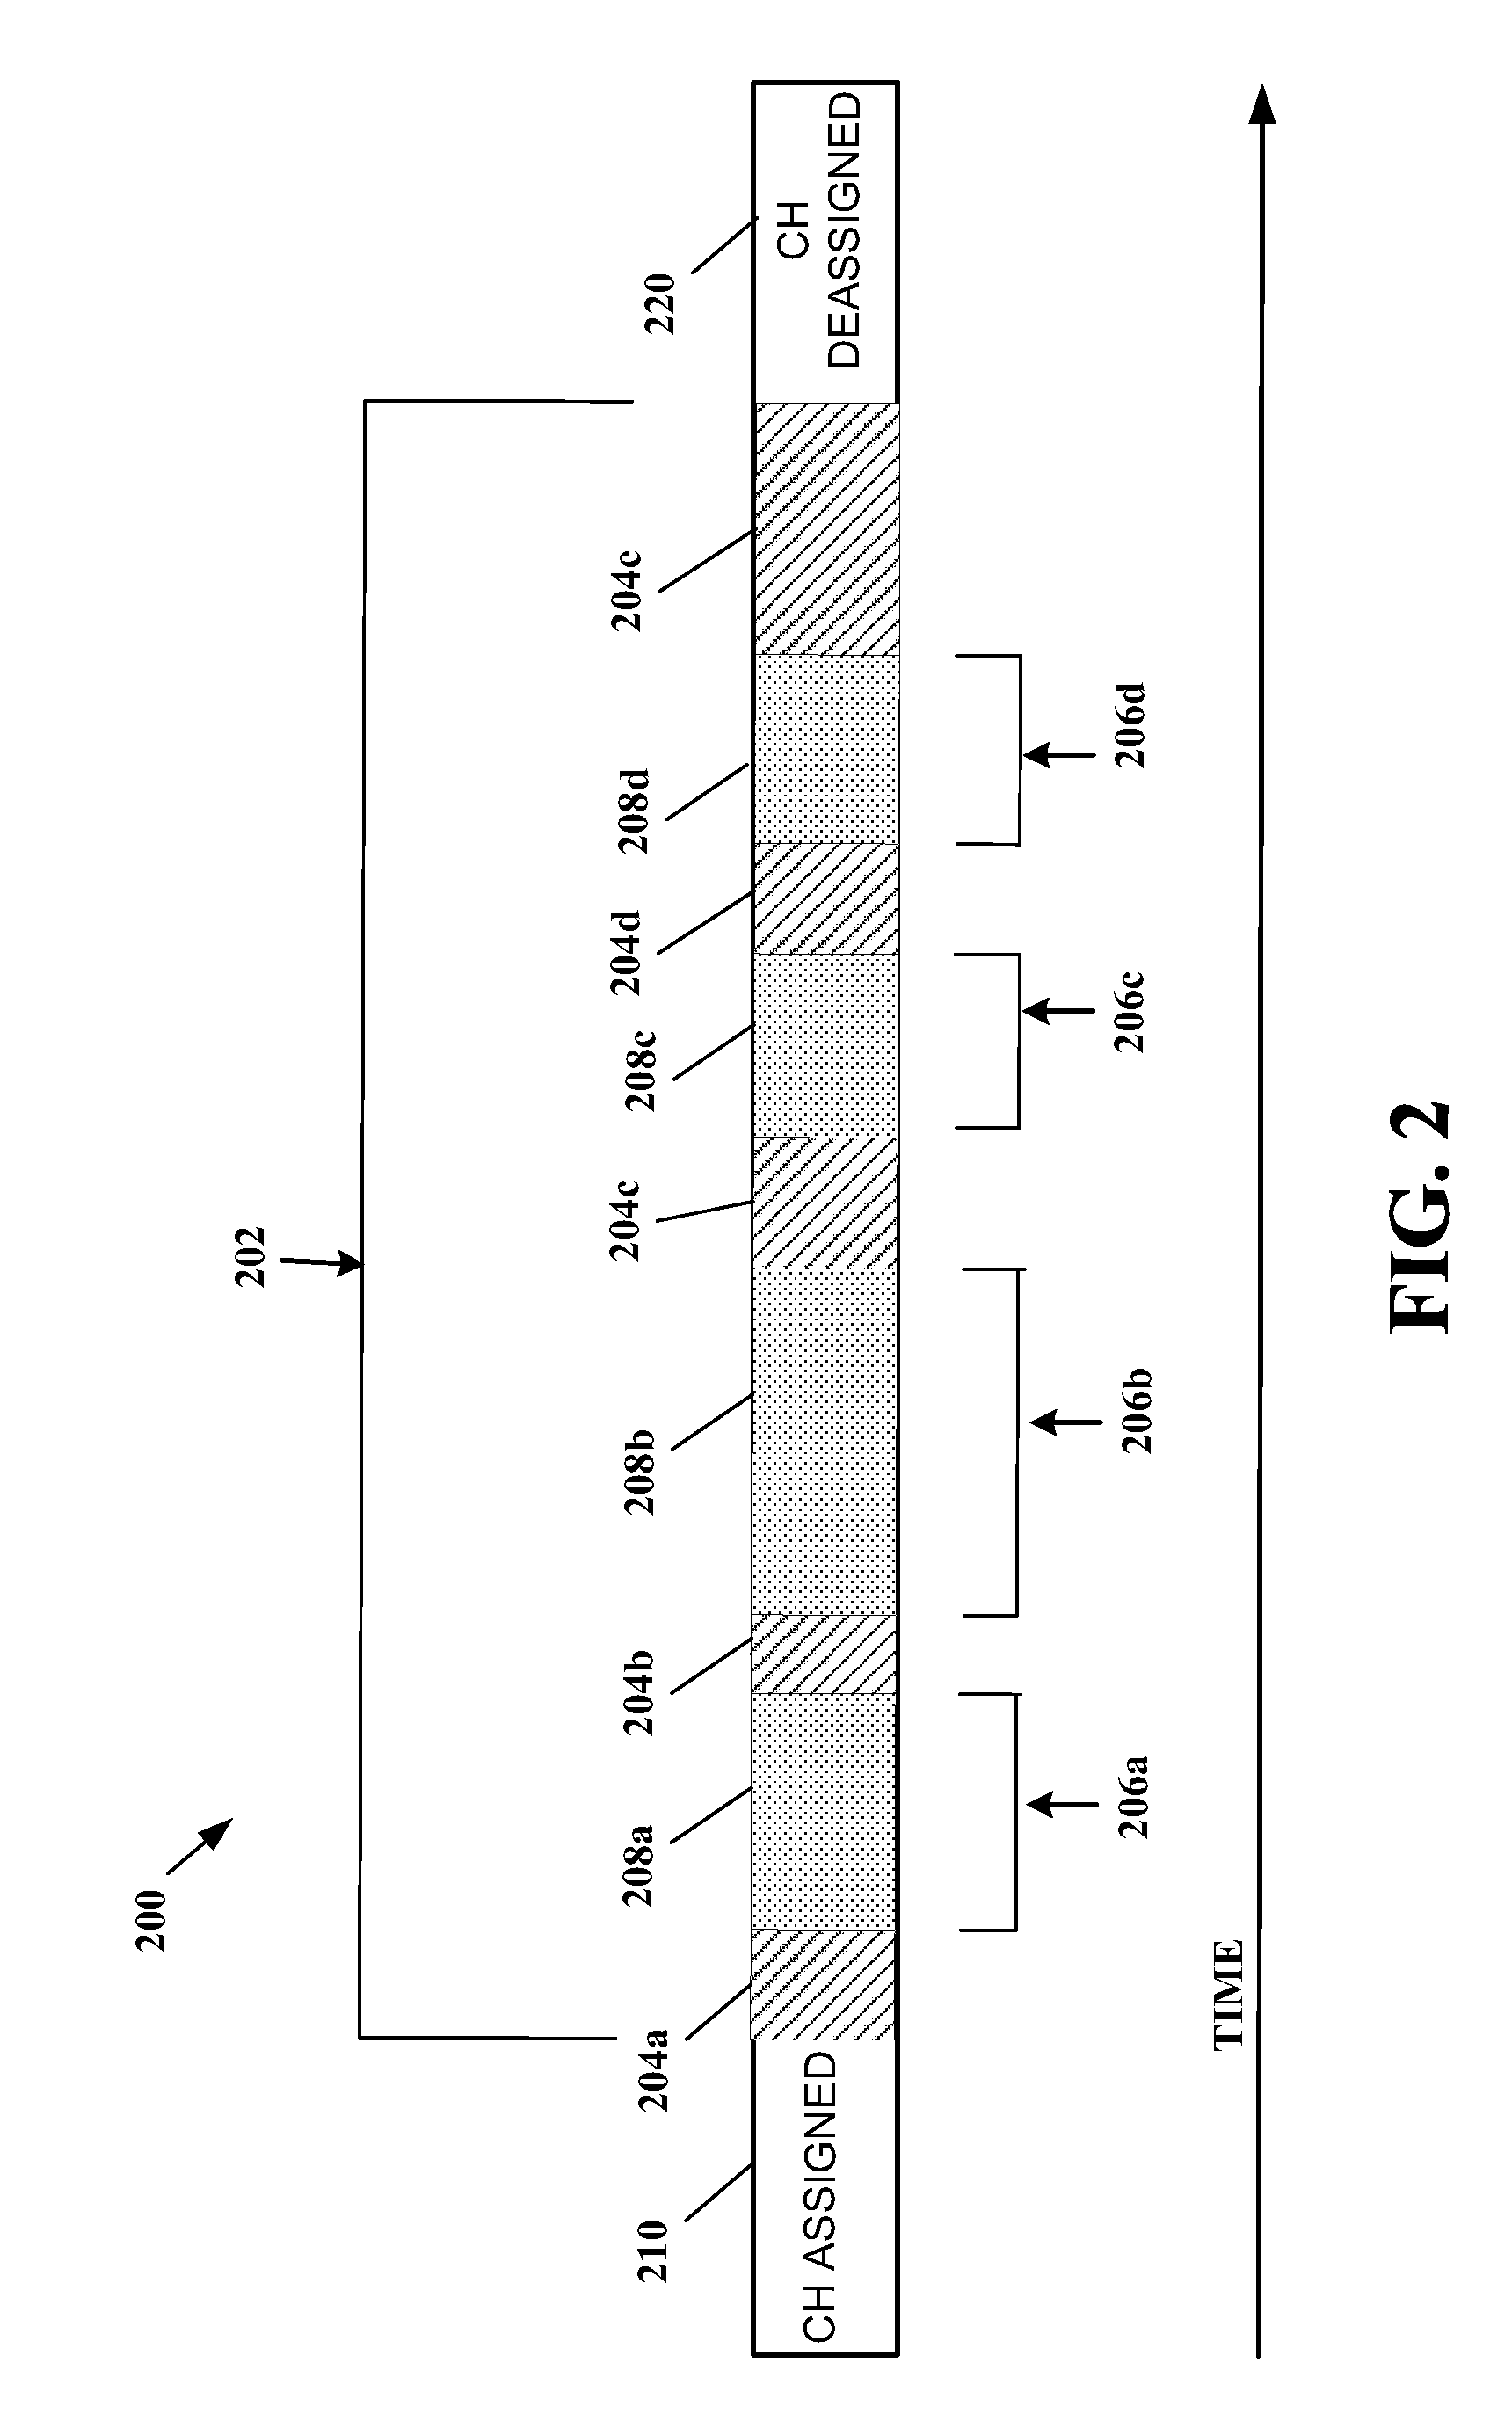 Method and apparatus for improving performance of erasure sequence detection